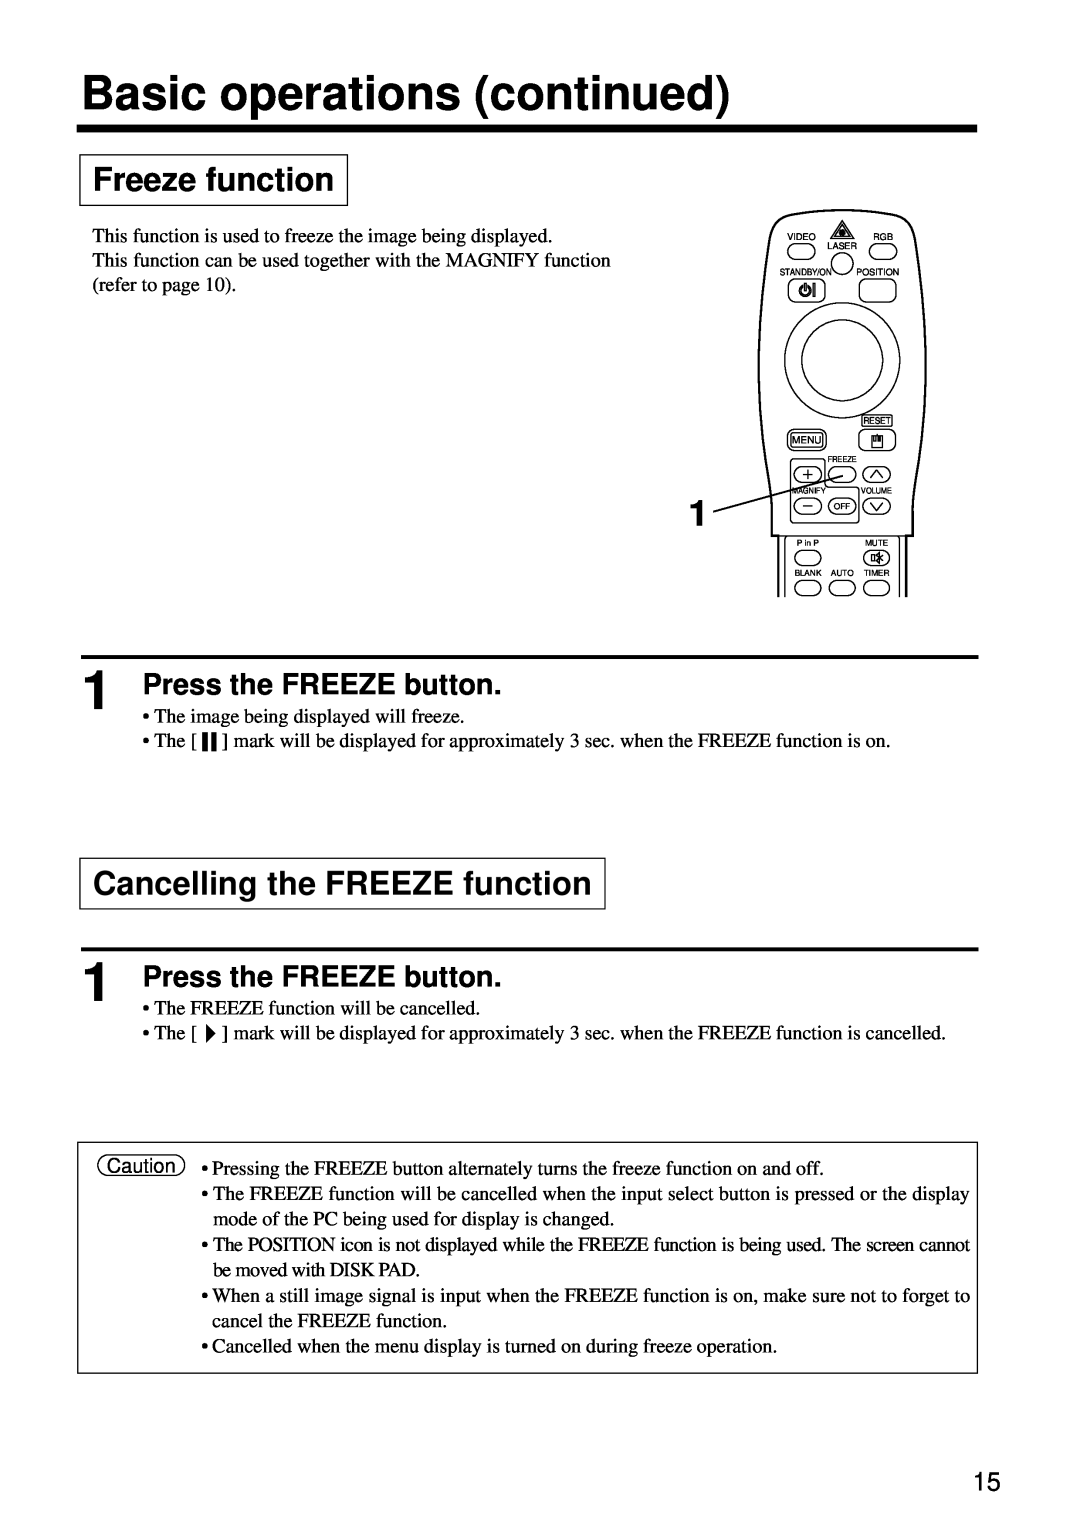 Hitachi CP-S860W Freeze function, Cancelling the FREEZE function, Press the FREEZE button, Basic operations continued 